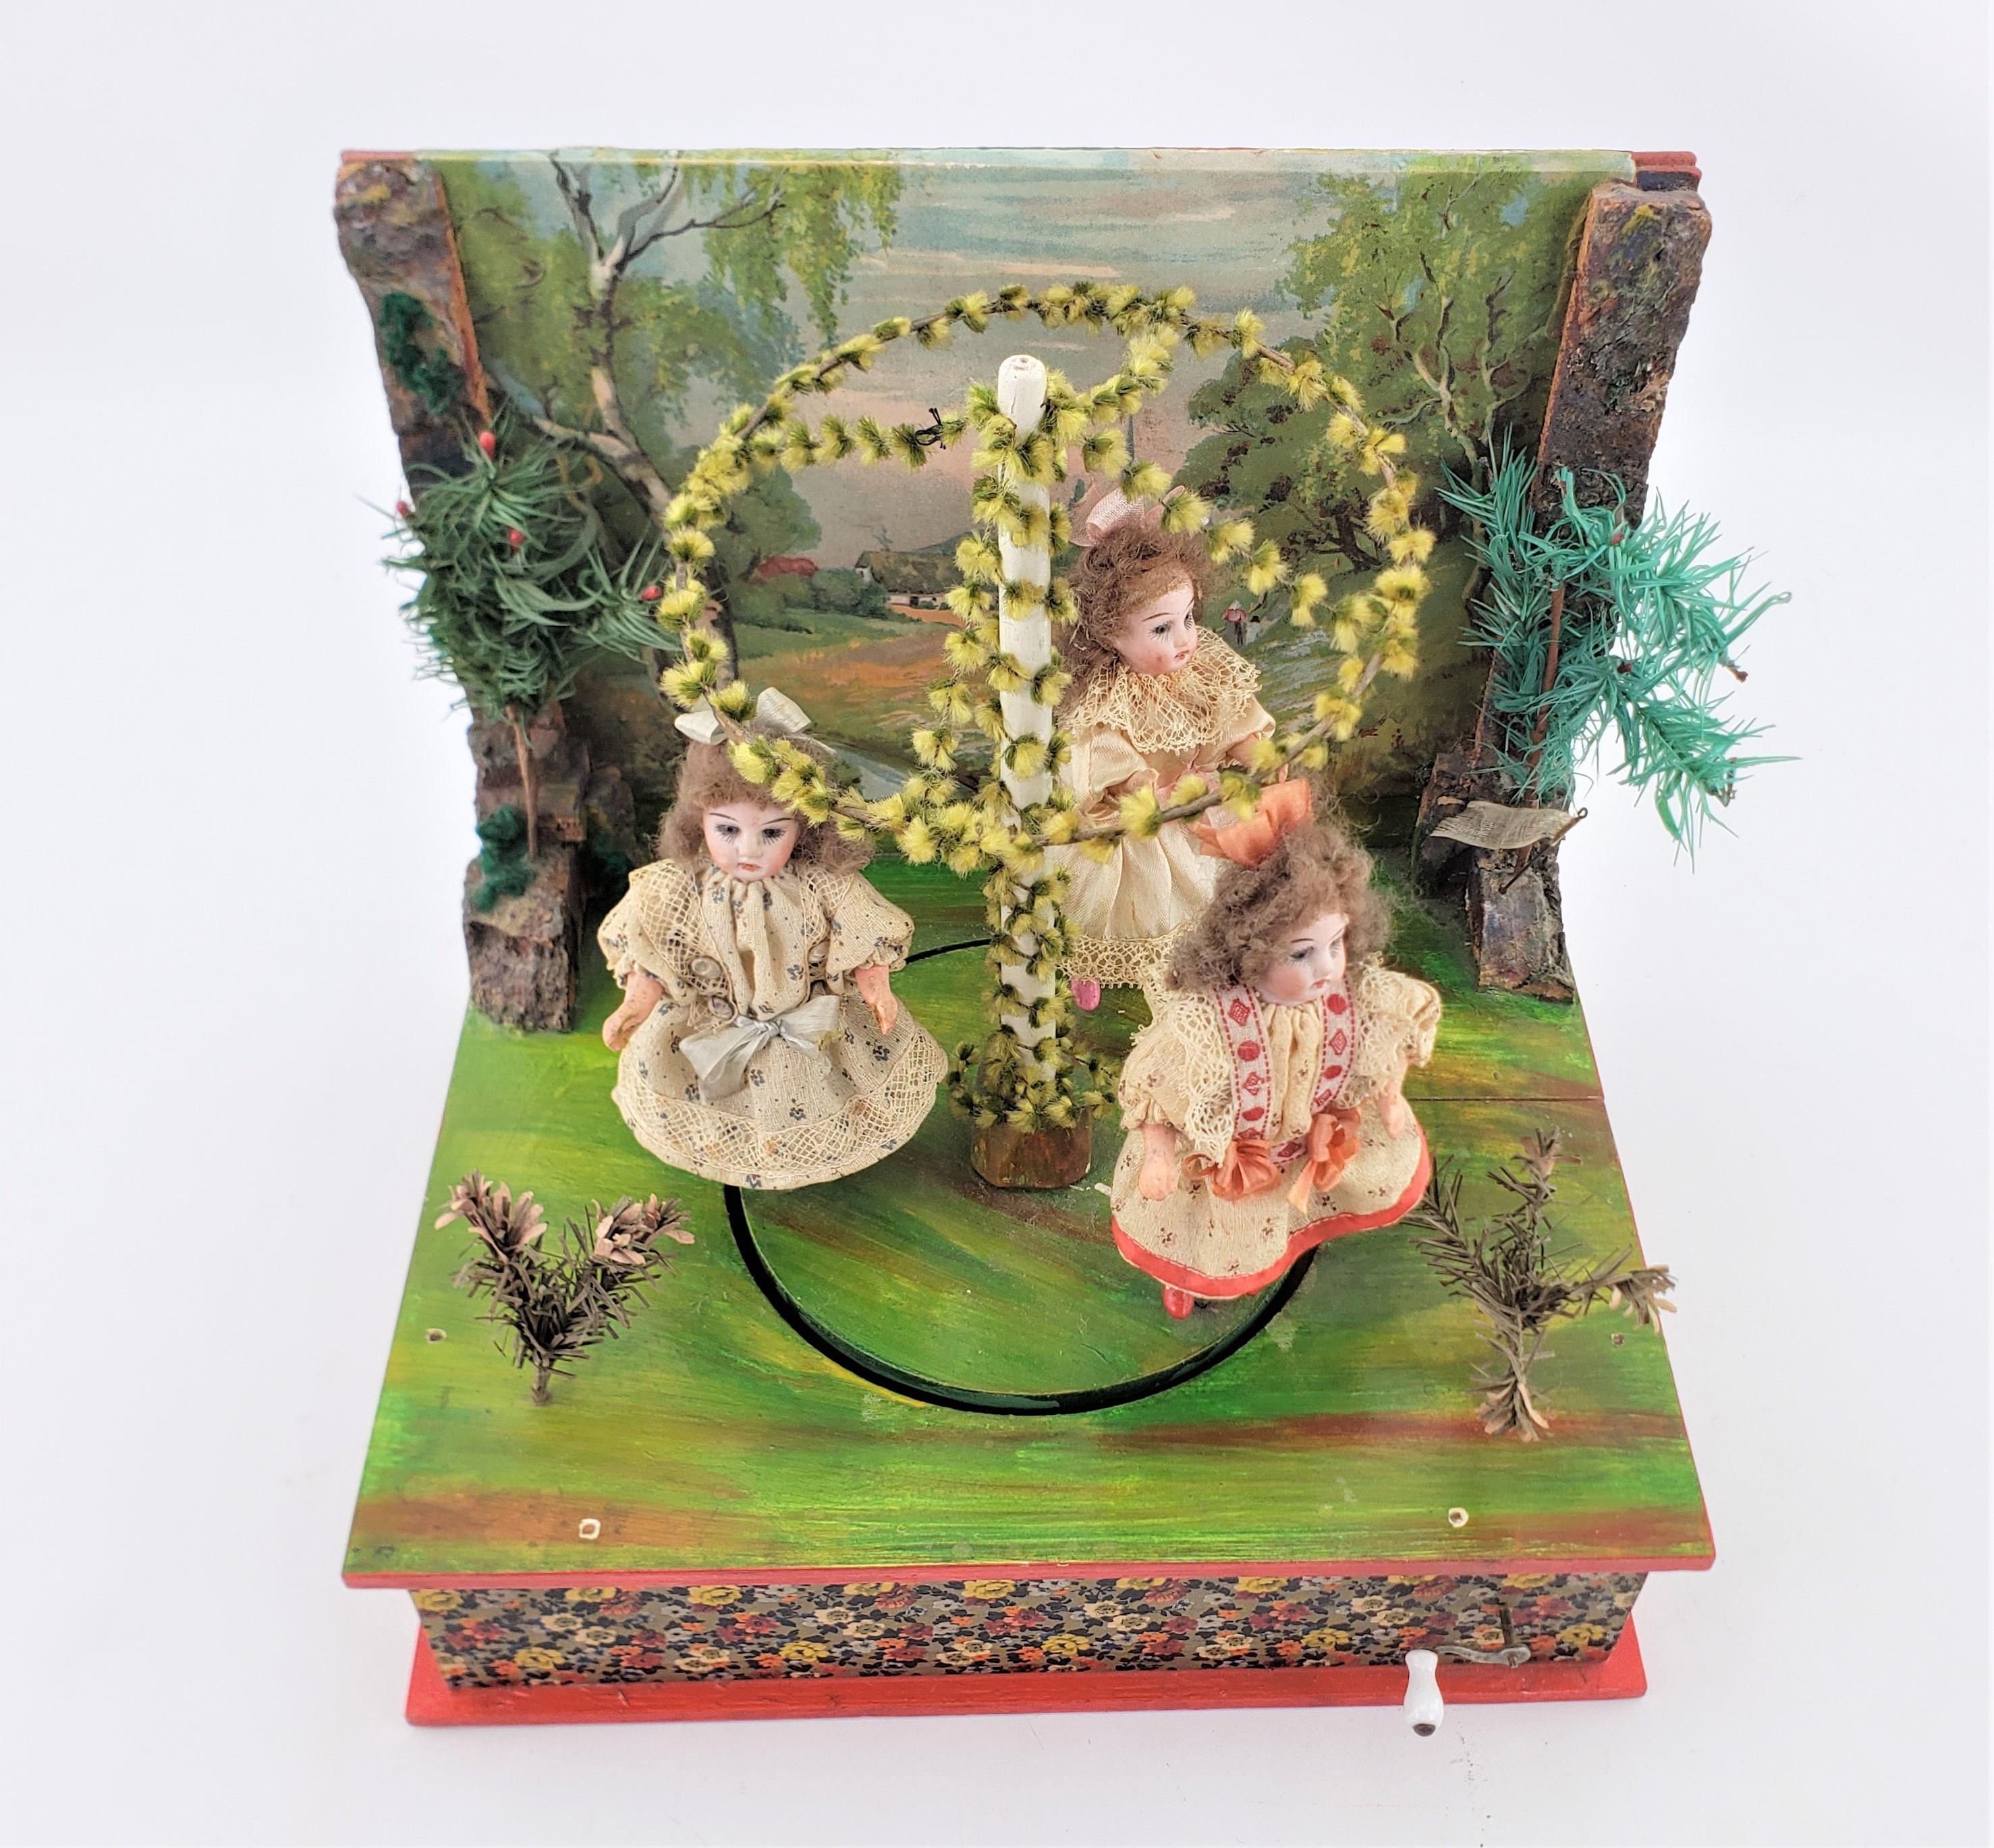 20th Century Antique German Toy Automaton Music Box with Girls Dancing Around the Maypole